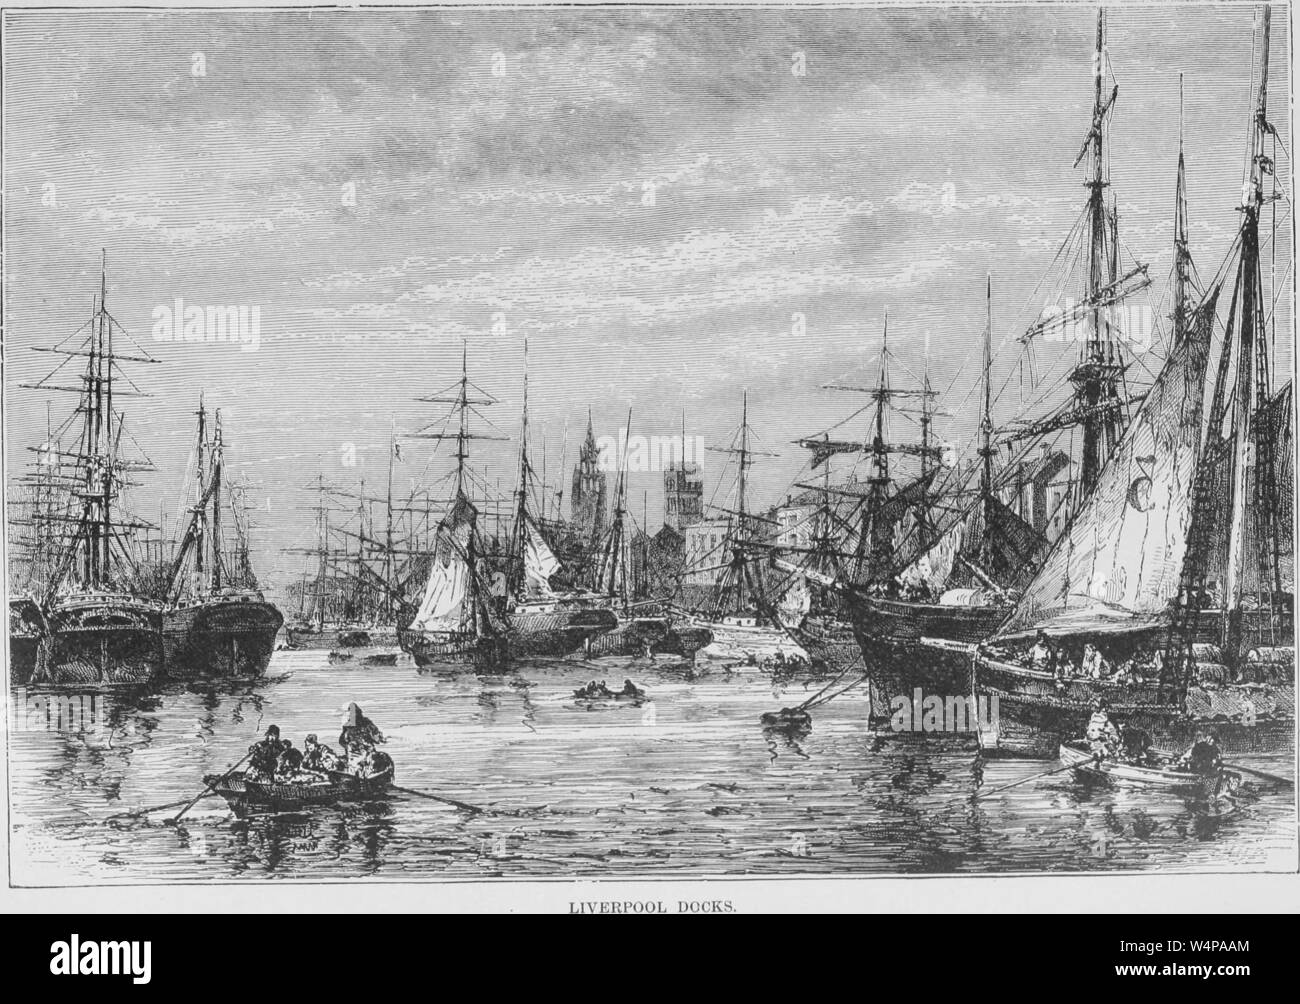 Engraving of the sailboats at the Liverpool docks, England, from the book 'The earth and its inhabitants' by Elisee Reclus, 1881. Courtesy Internet Archive. () Stock Photo